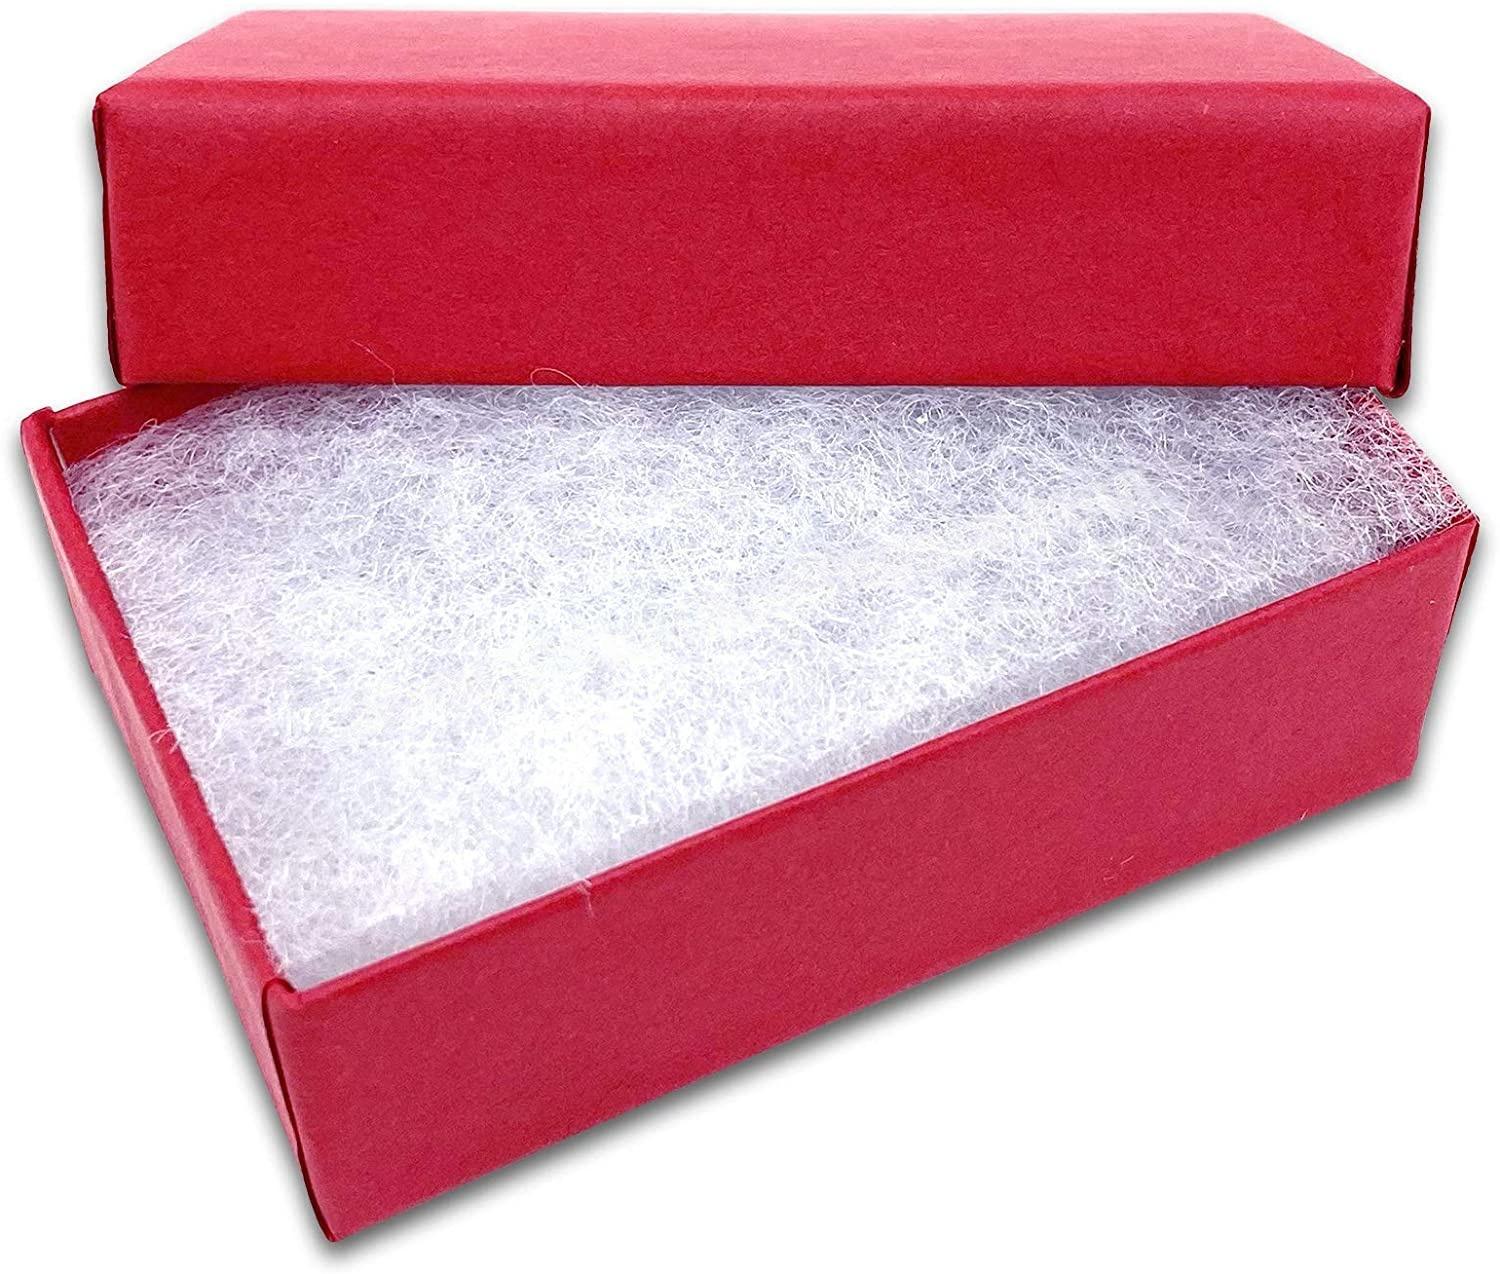 Cotton Filled Cardboard Paper Jewelry Box Gift Case - Matte Red